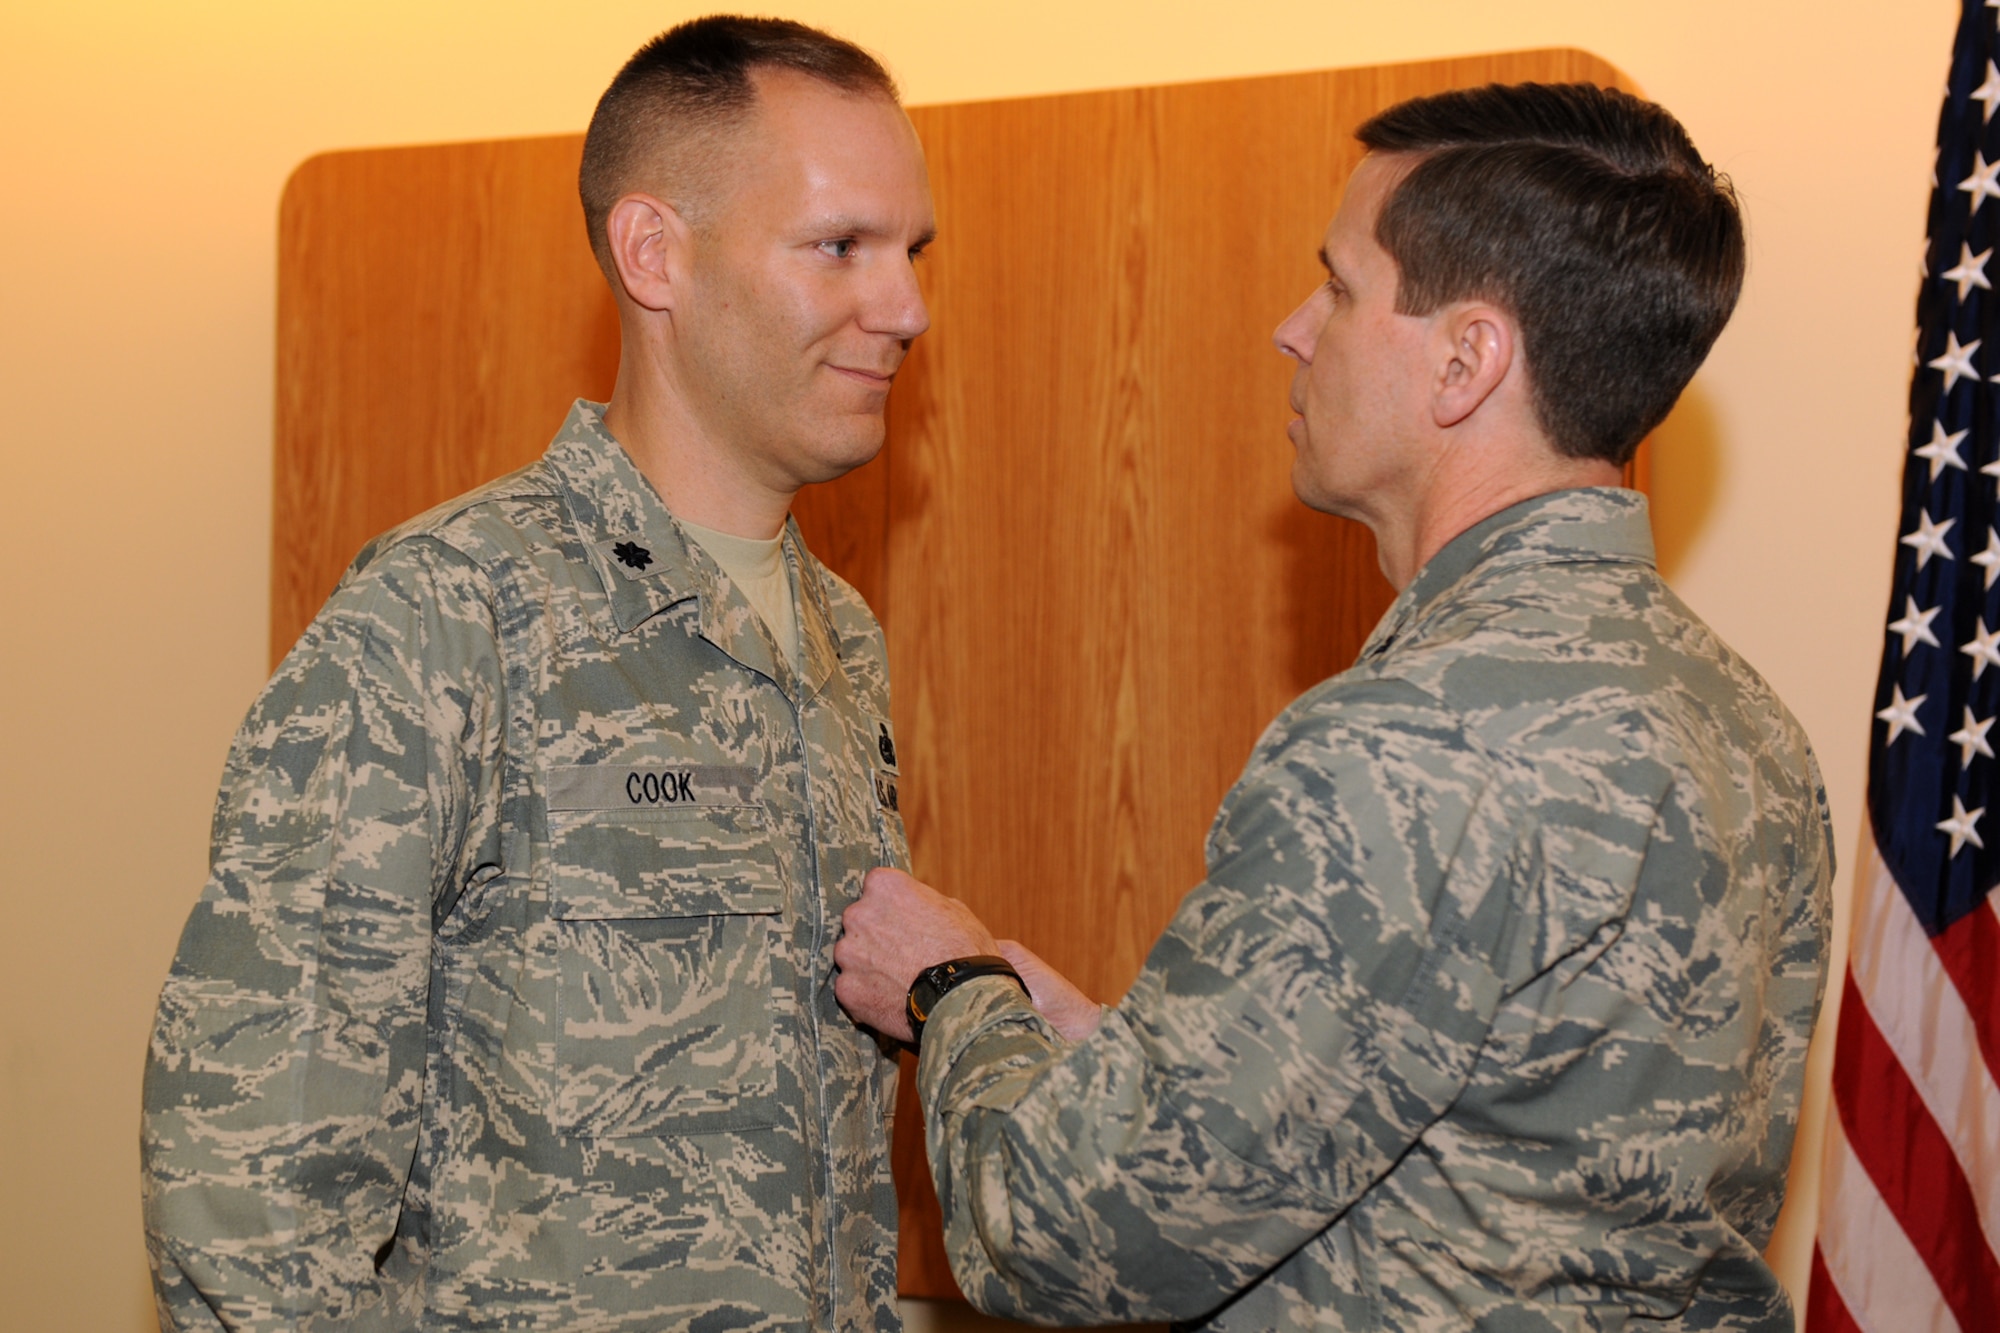 Lt. Col. Edward Cook (left), Commander, 174th Fighter Wing Logistics Readiness Squadron, is presented the Bronze Star medal by 174th Fighter Wing Commander Col. Greg Semmel, during a ceremony held on 31 March 2012 at Hancock Field Air National Guard Base, Syracuse, NY.  Cook received the Bronze Star for exceptionally meritorious service as the Director of Joint Logistics, Combined Forces Special Operations Component Command, while deployed to Afghanistan from August 2011-Feb 2012. (NY Air National Guard Photo by: Staff Sgt. James N. Faso II, Released)